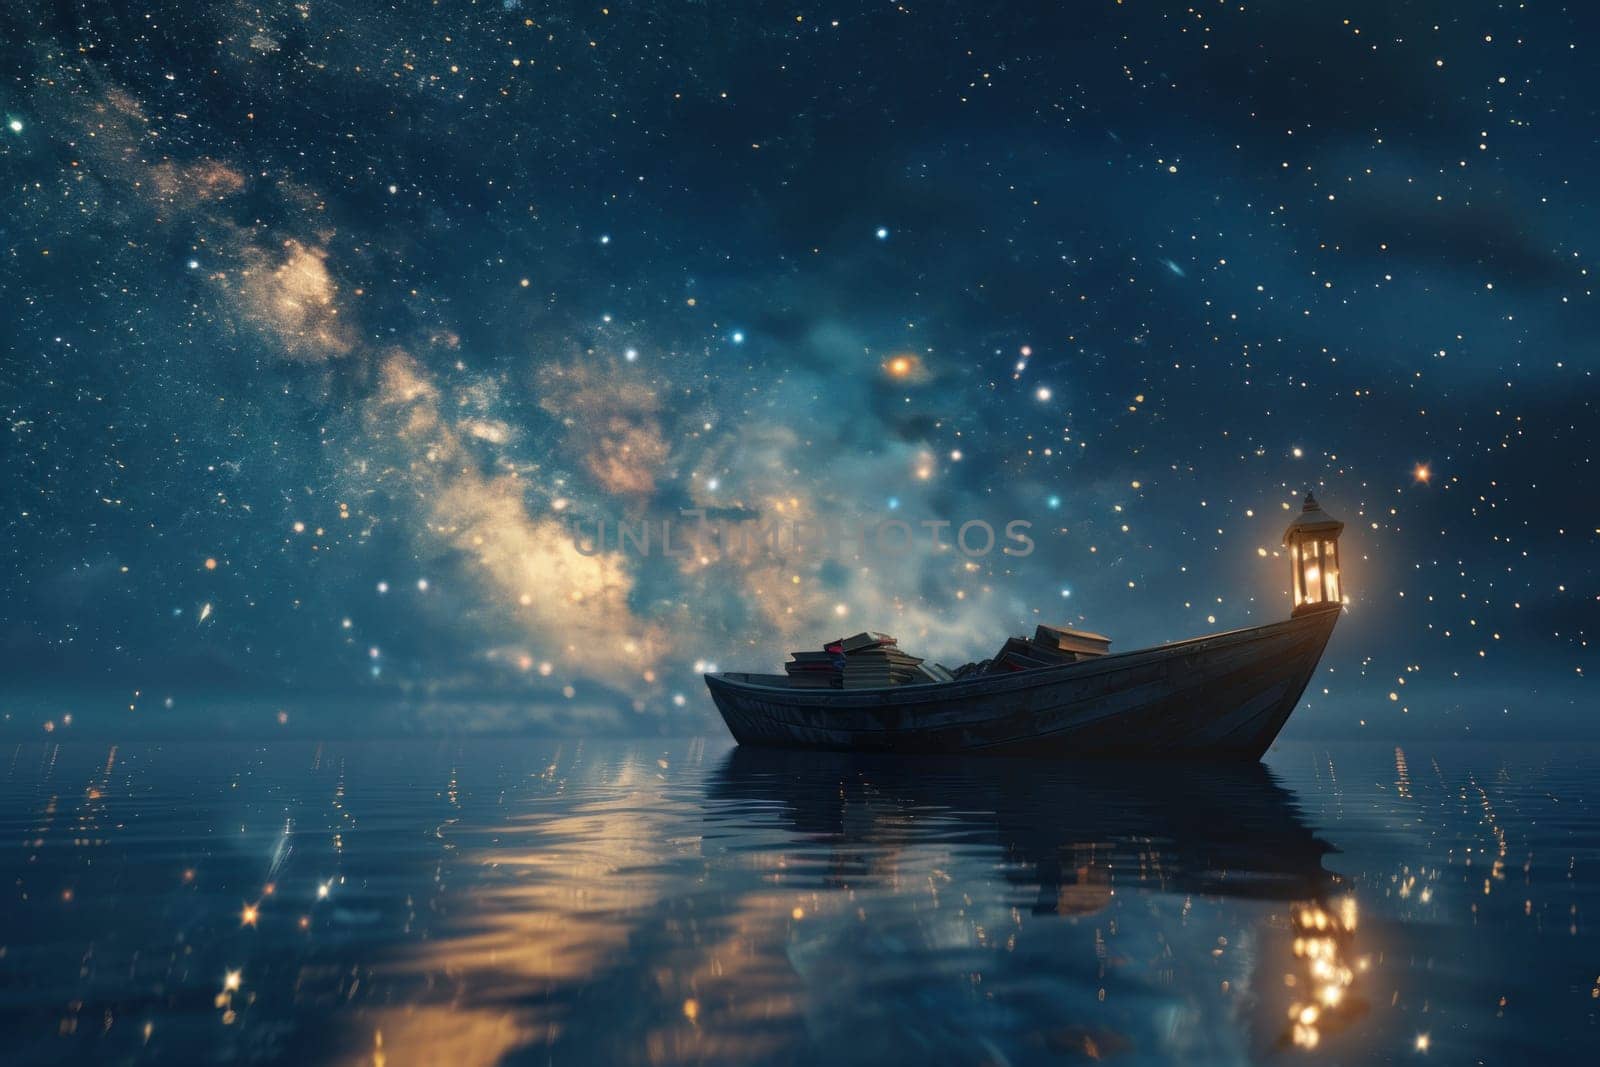 A boat is floating on a lake at night with a lantern on it.